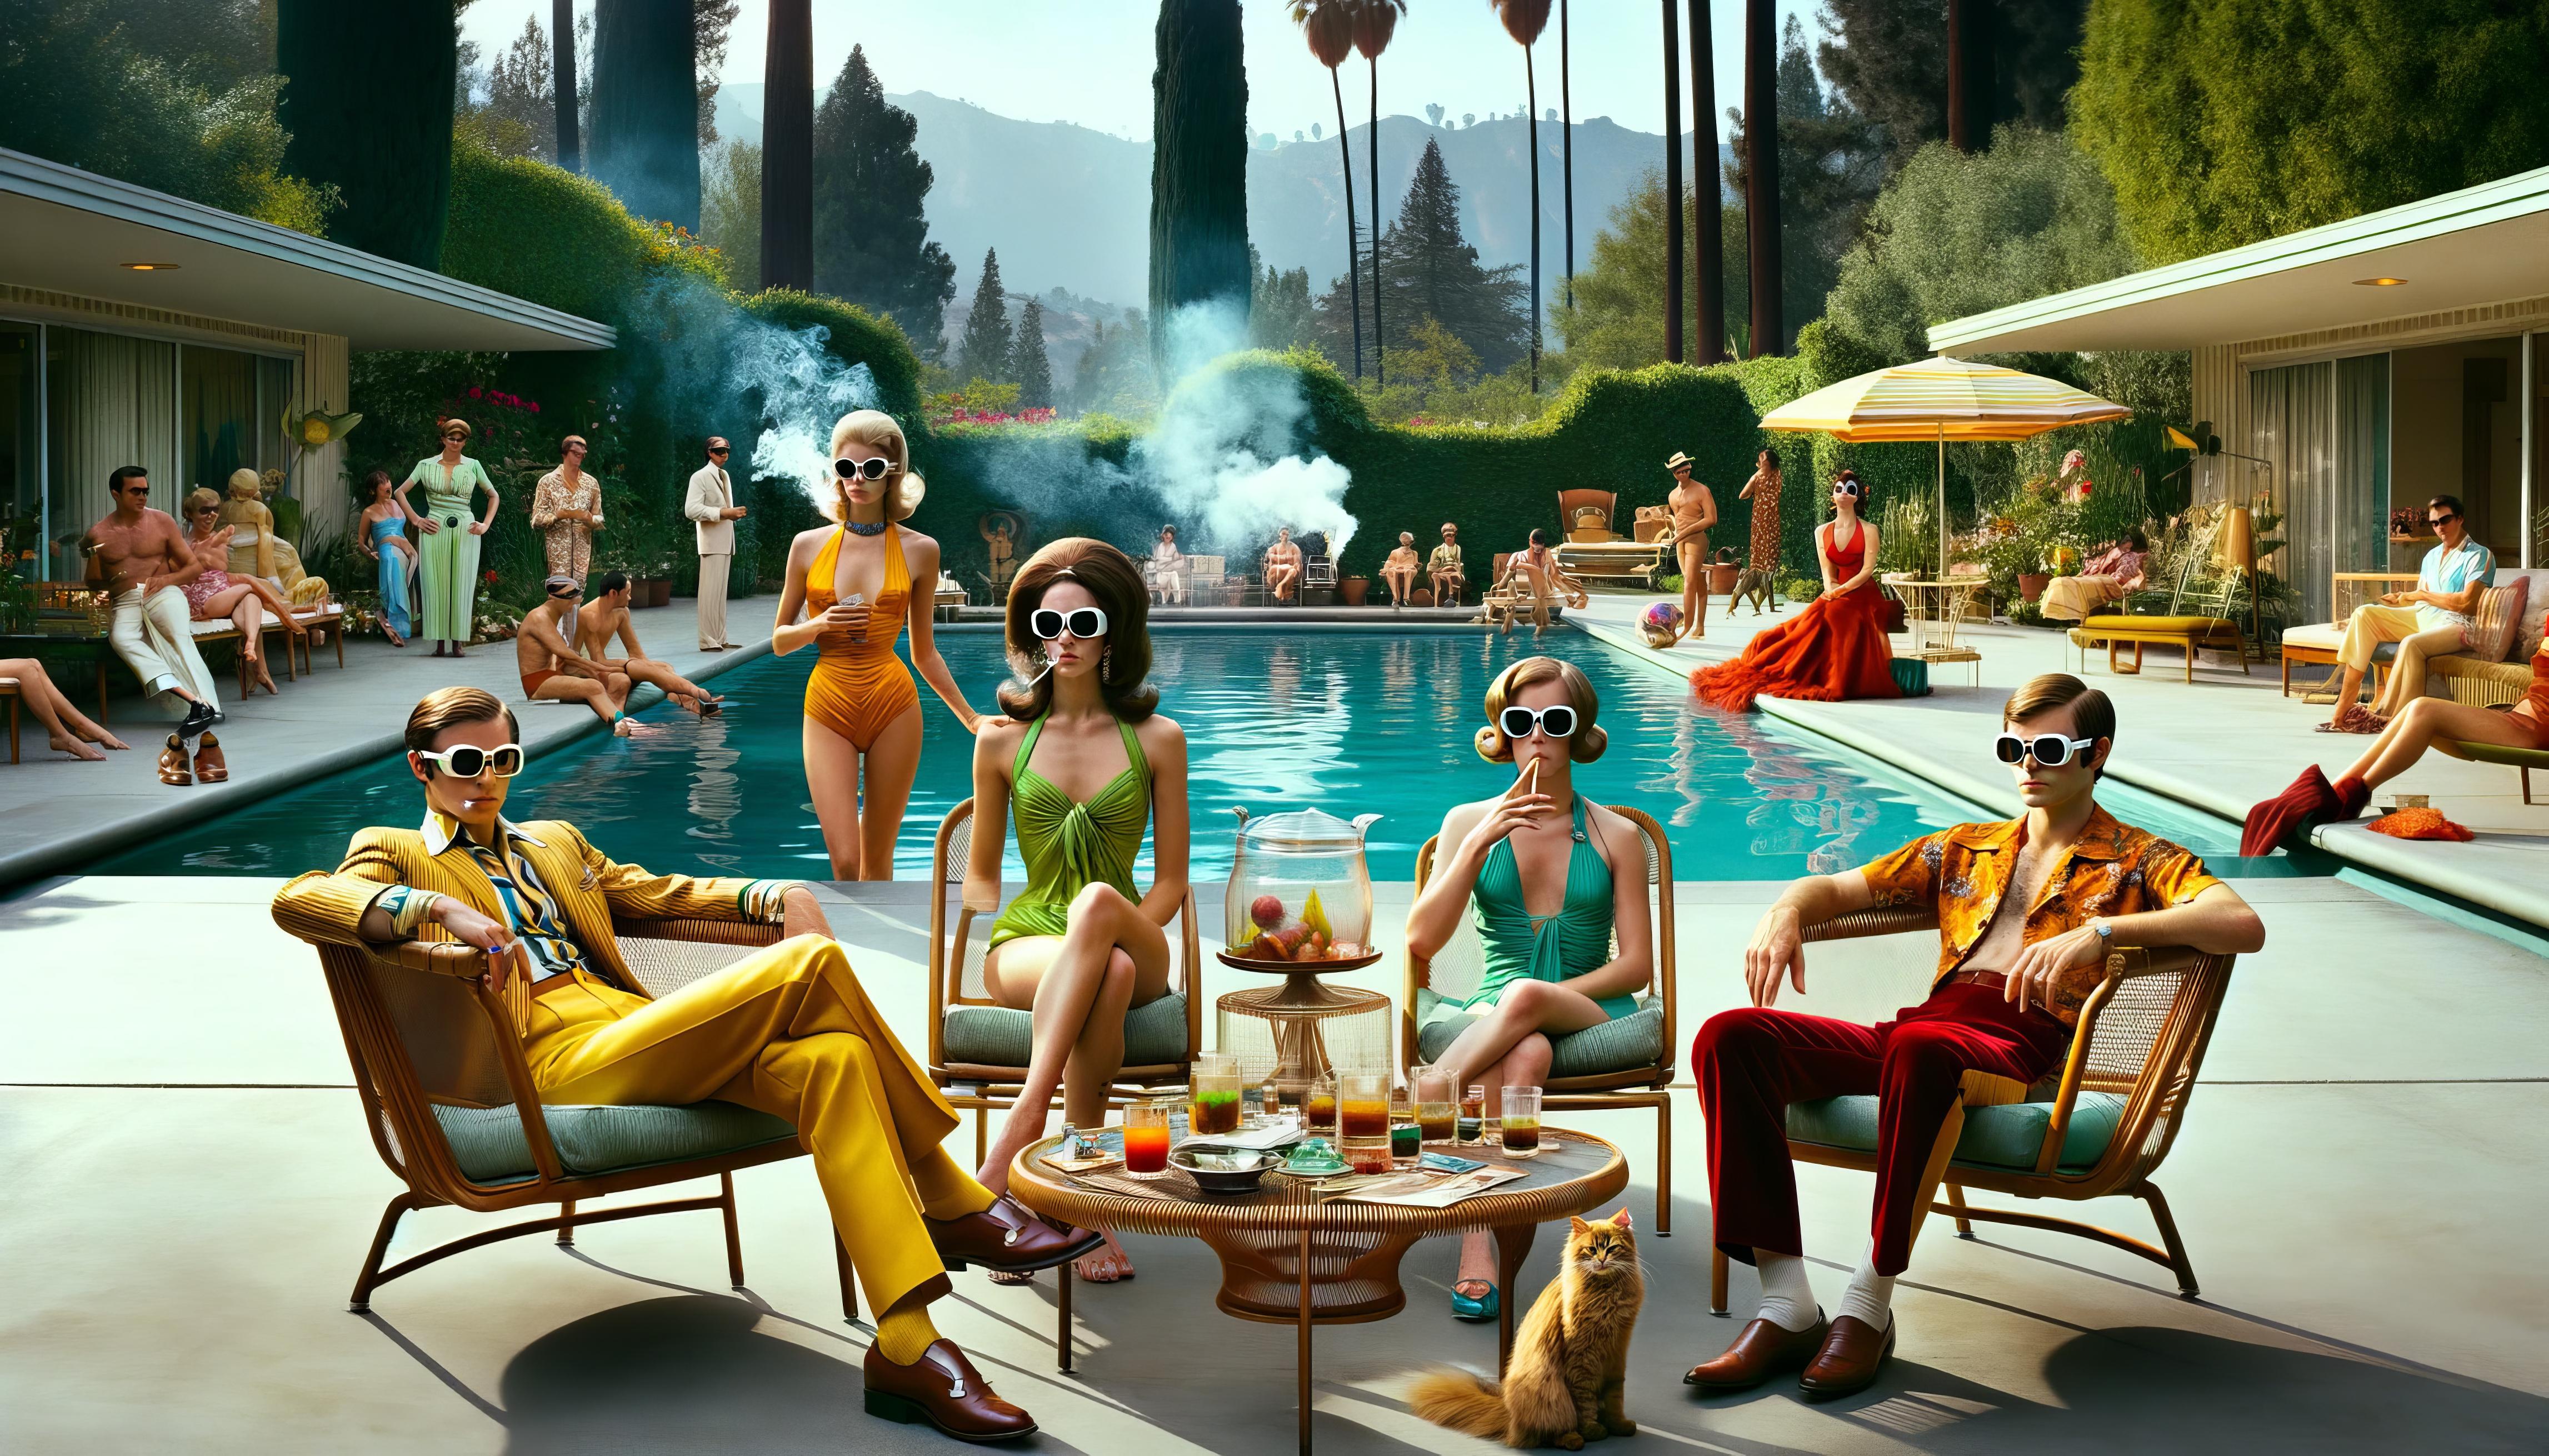 Lee Wells
Poolside Prophets (EOW L24)
End of the World Party Series
2023
Archival pigment print
Edition of 1
Signed, dated and numbered by the artist

Caption: Poolside Prophets: The 'Sunshine Syndicate' lounges in lavish style Amidst the grandeur